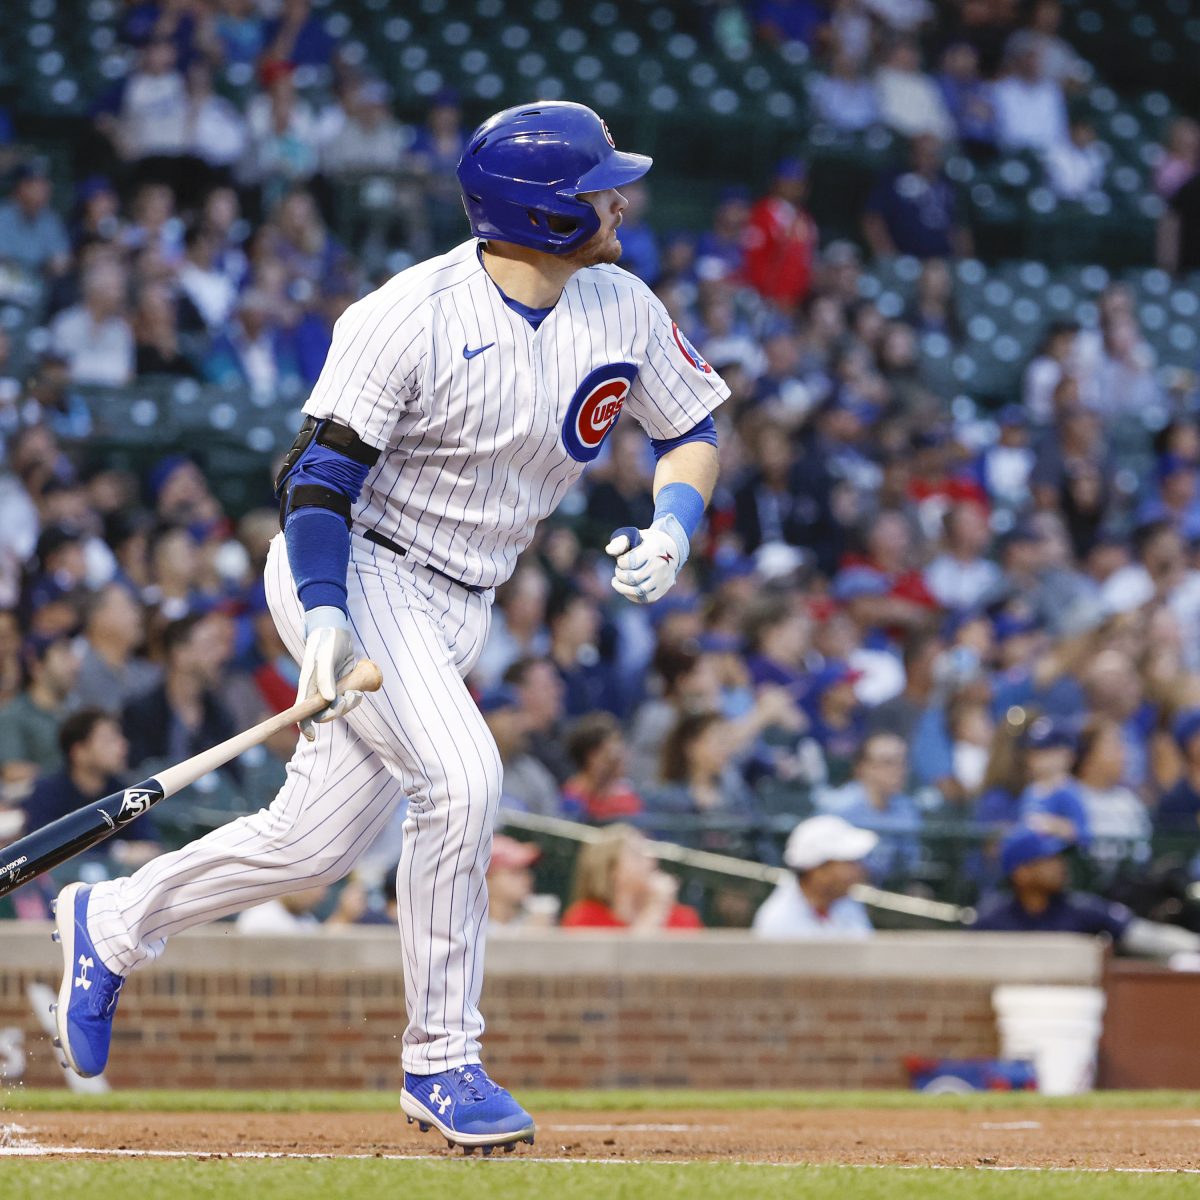 Colorado Rockies vs. Chicago Cubs Prediction, Preview, and Odds - 9-18-2022